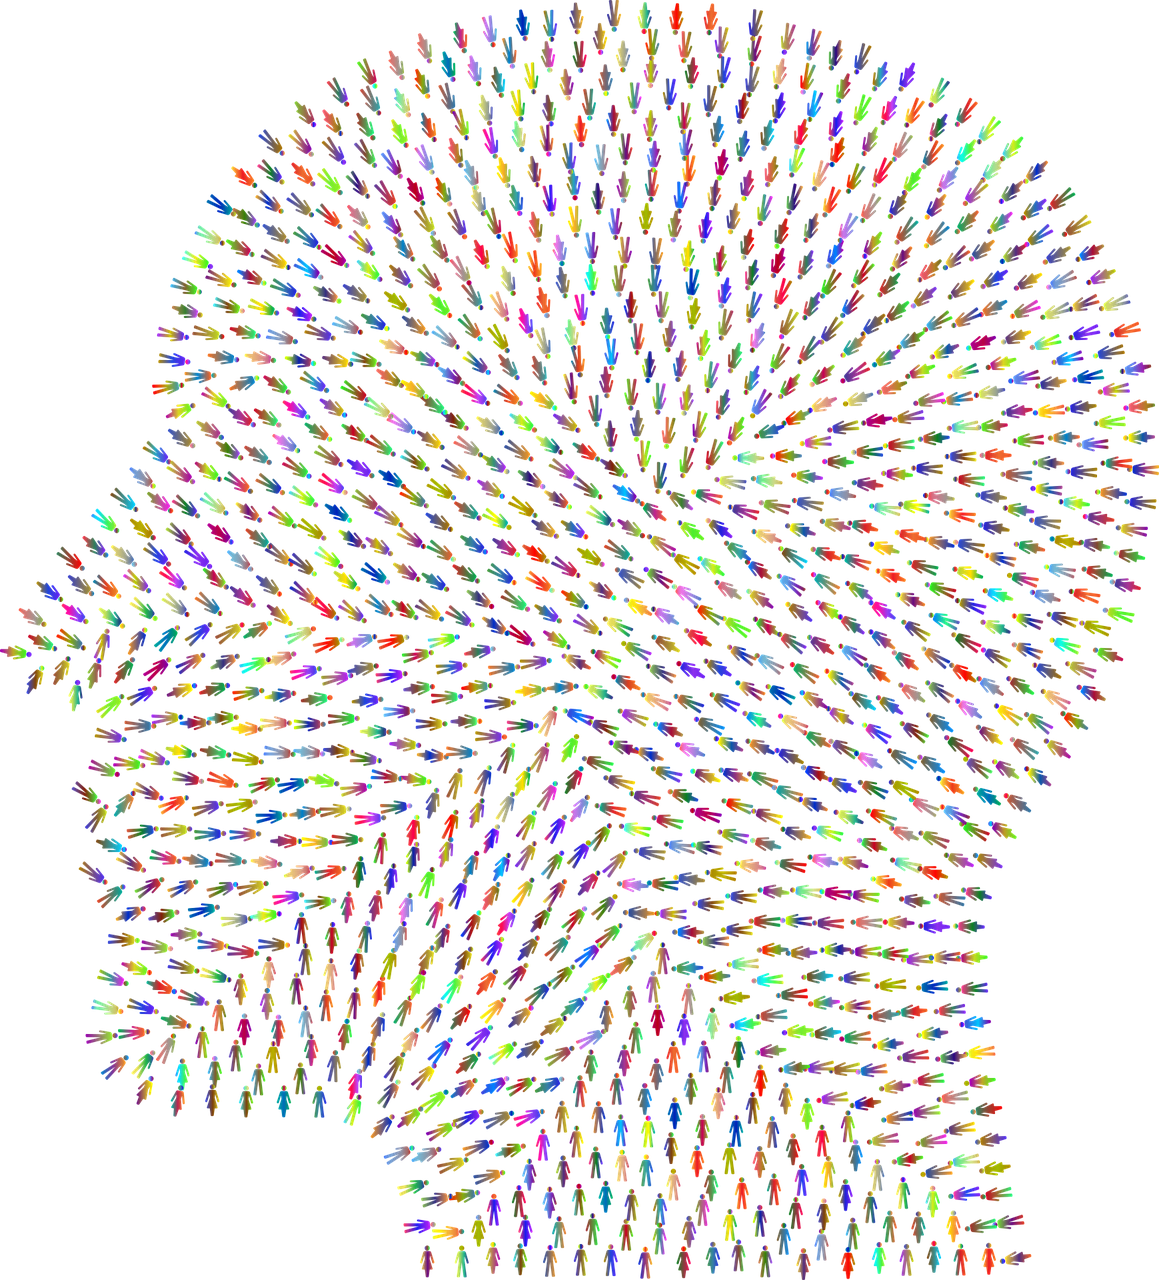 a multicolored image of a man's head on a black background, generative art, with colorfull jellybeans organs, tesselation, human silhouette, repetitive